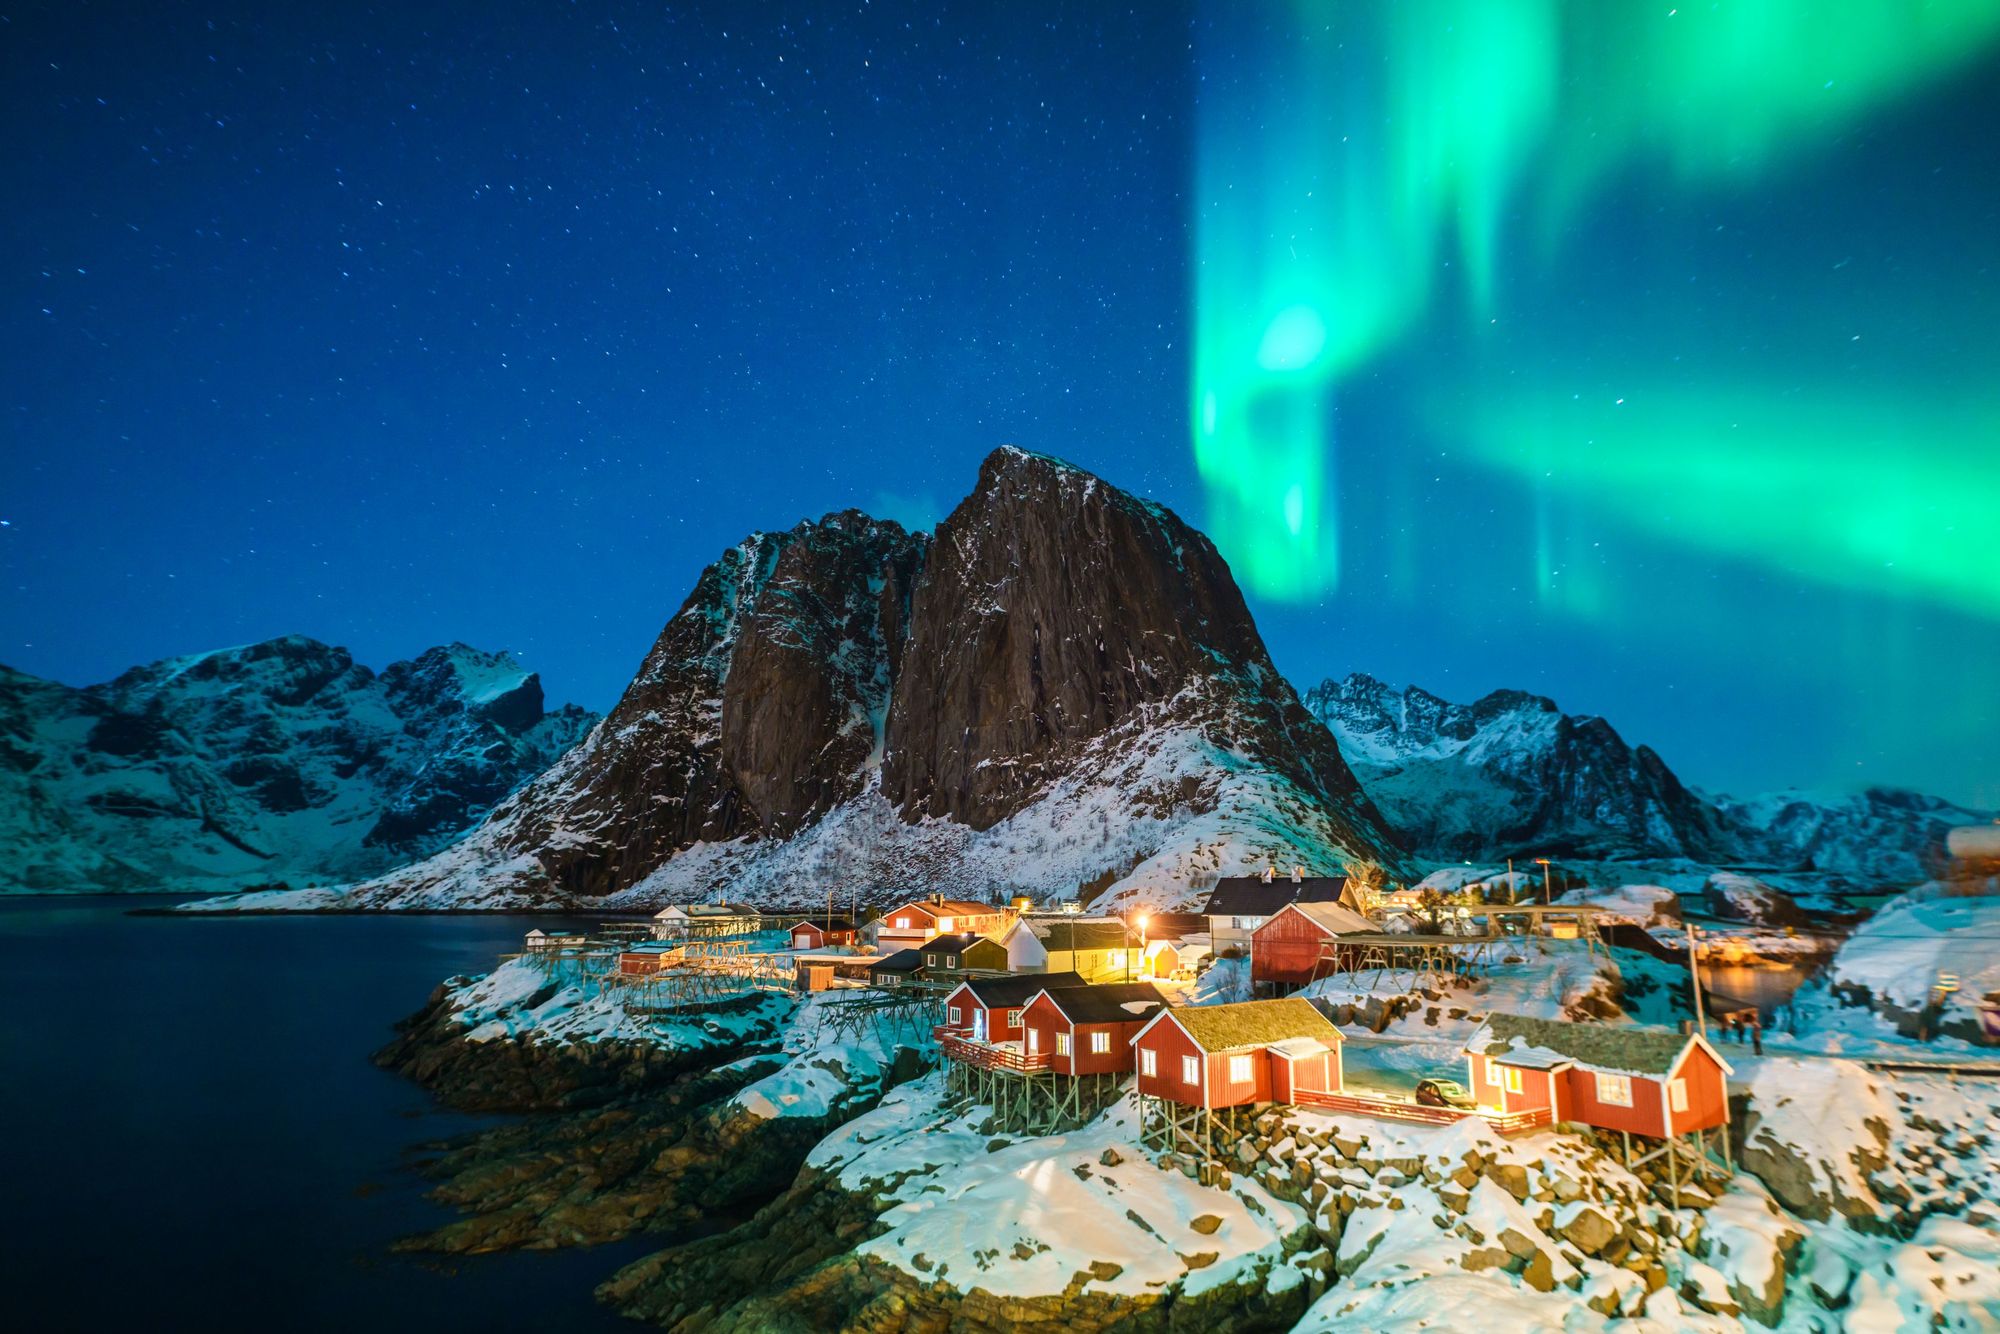 The northern lights in the sky behind the Lofoten Islands, in the north of Norway. Photo: Getty